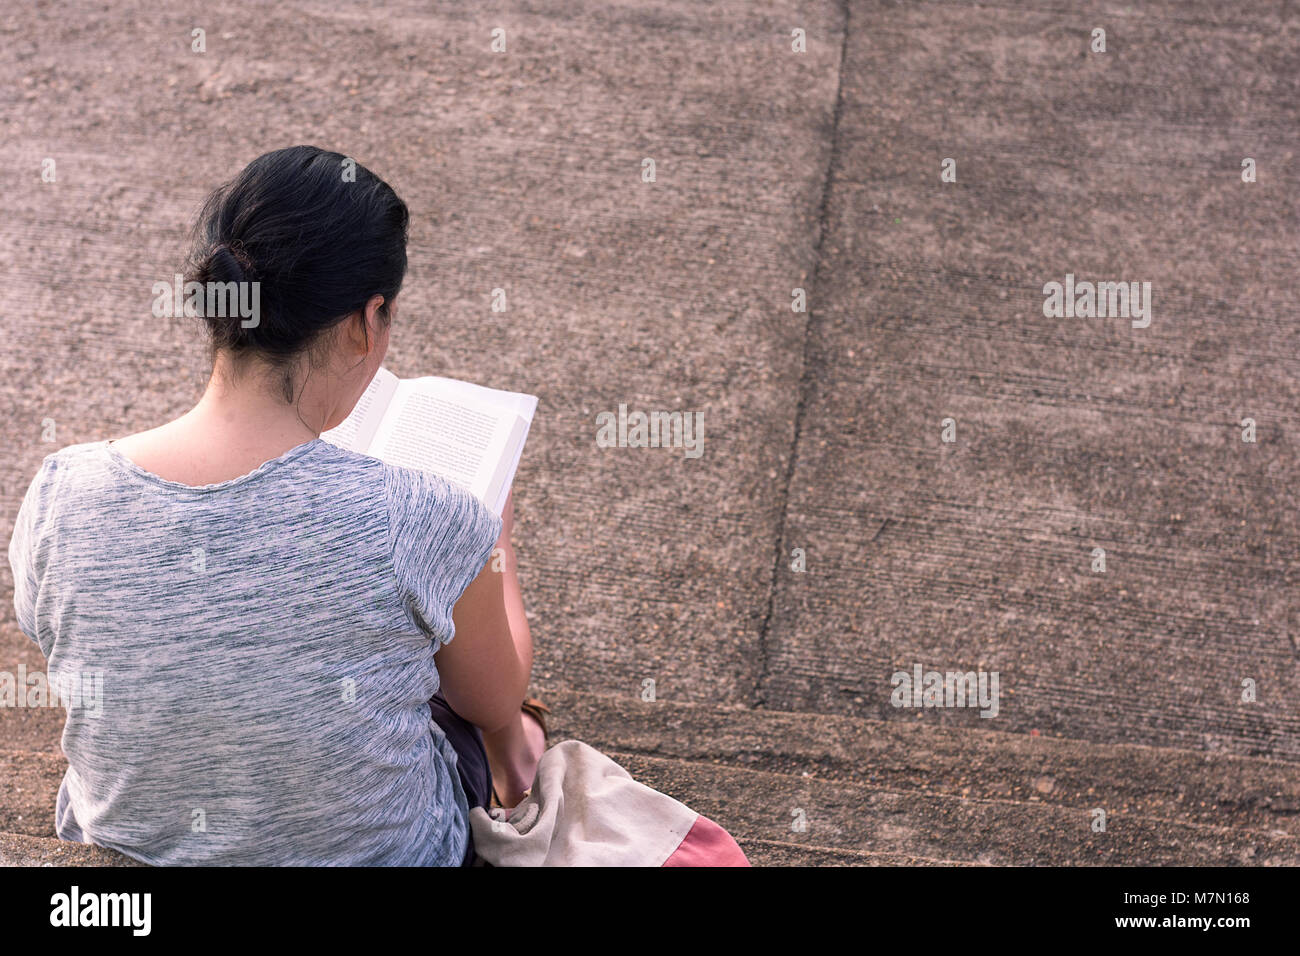 A young woman concentrates reading here hard back book whilst sat on some concrete steps. Stock Photo